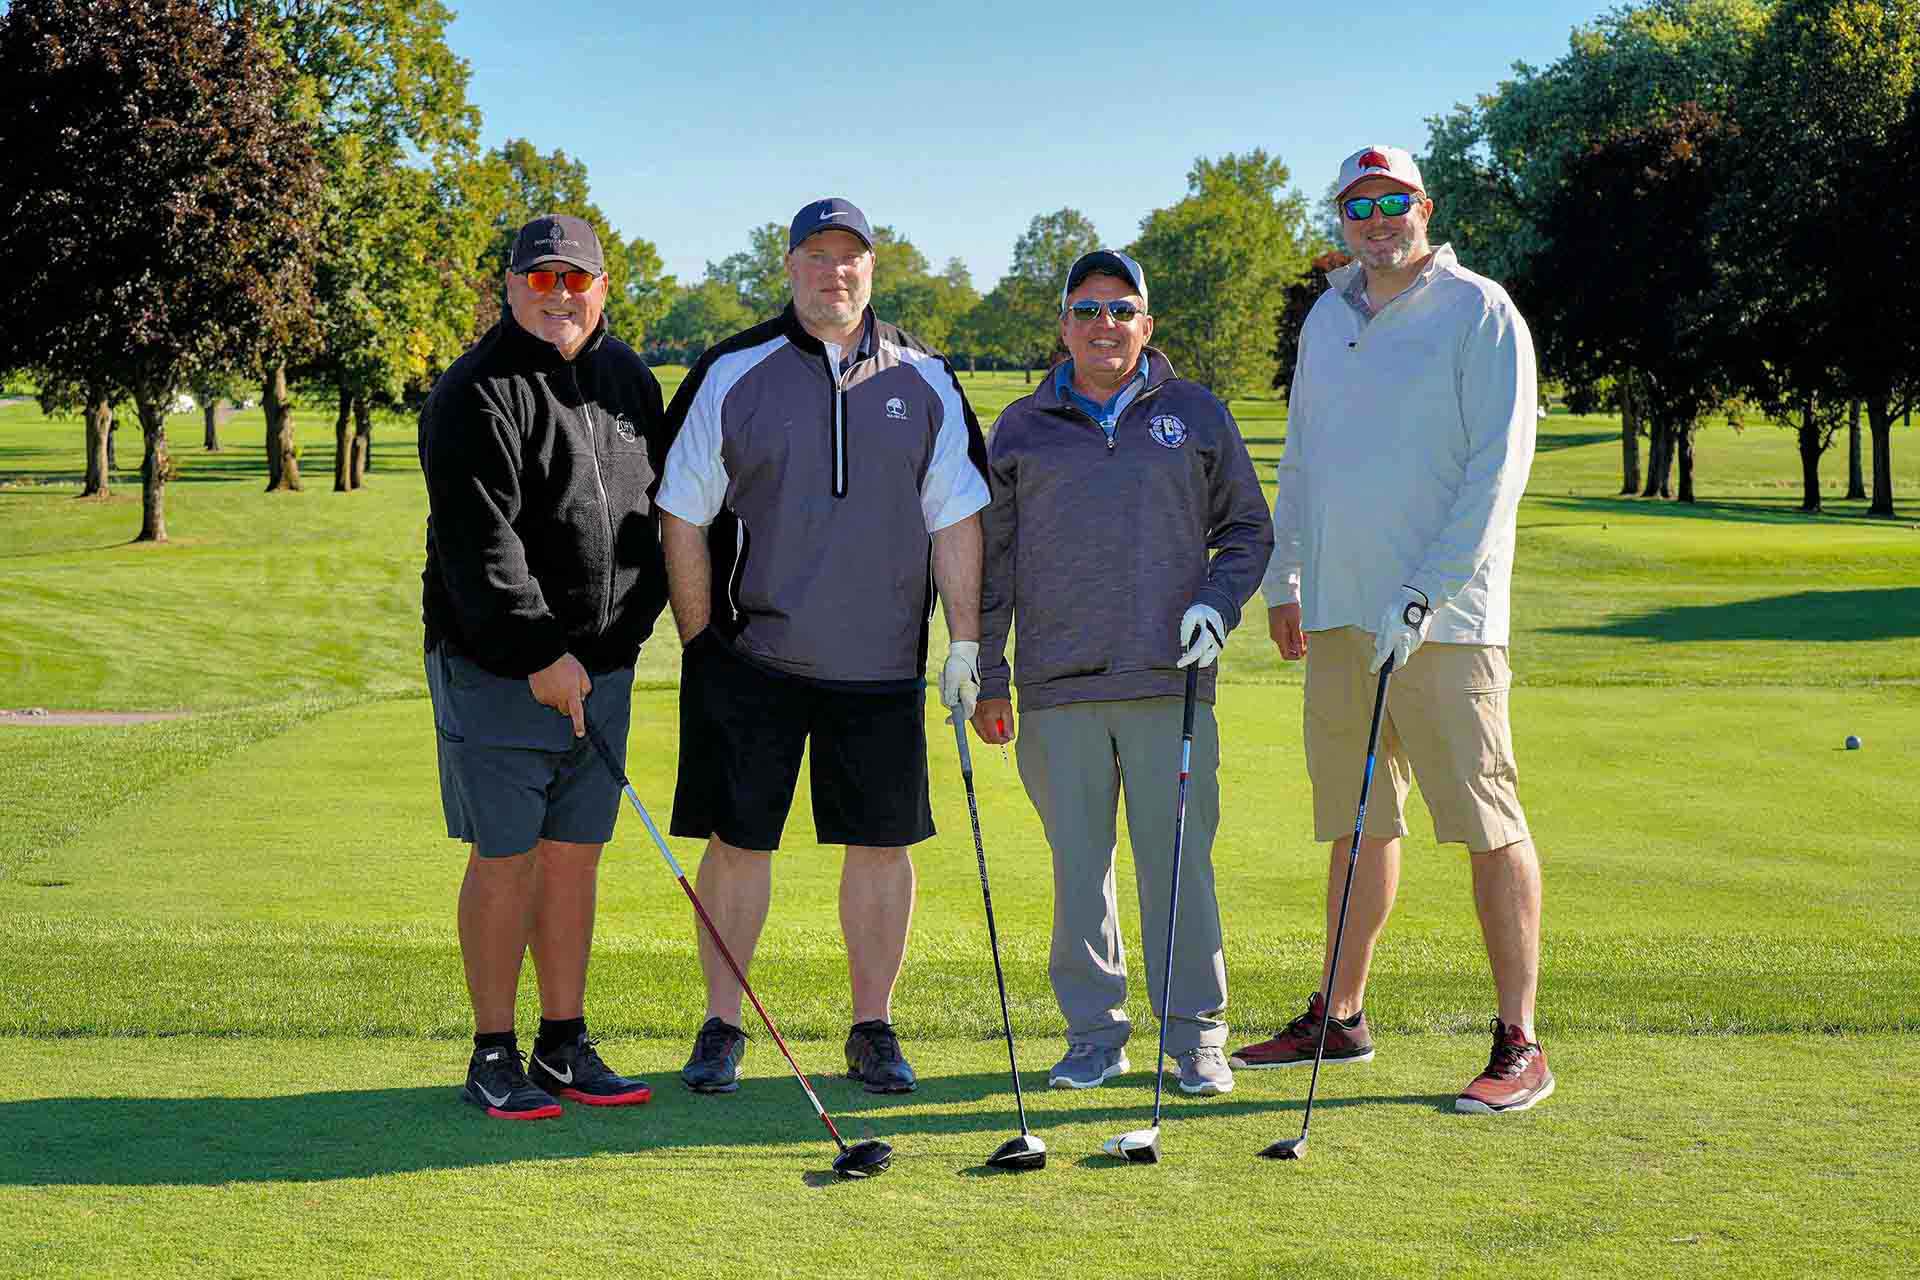 2020-endownment-classic-four-golfers-smiling-on-golf-course-holding-golf-clubs